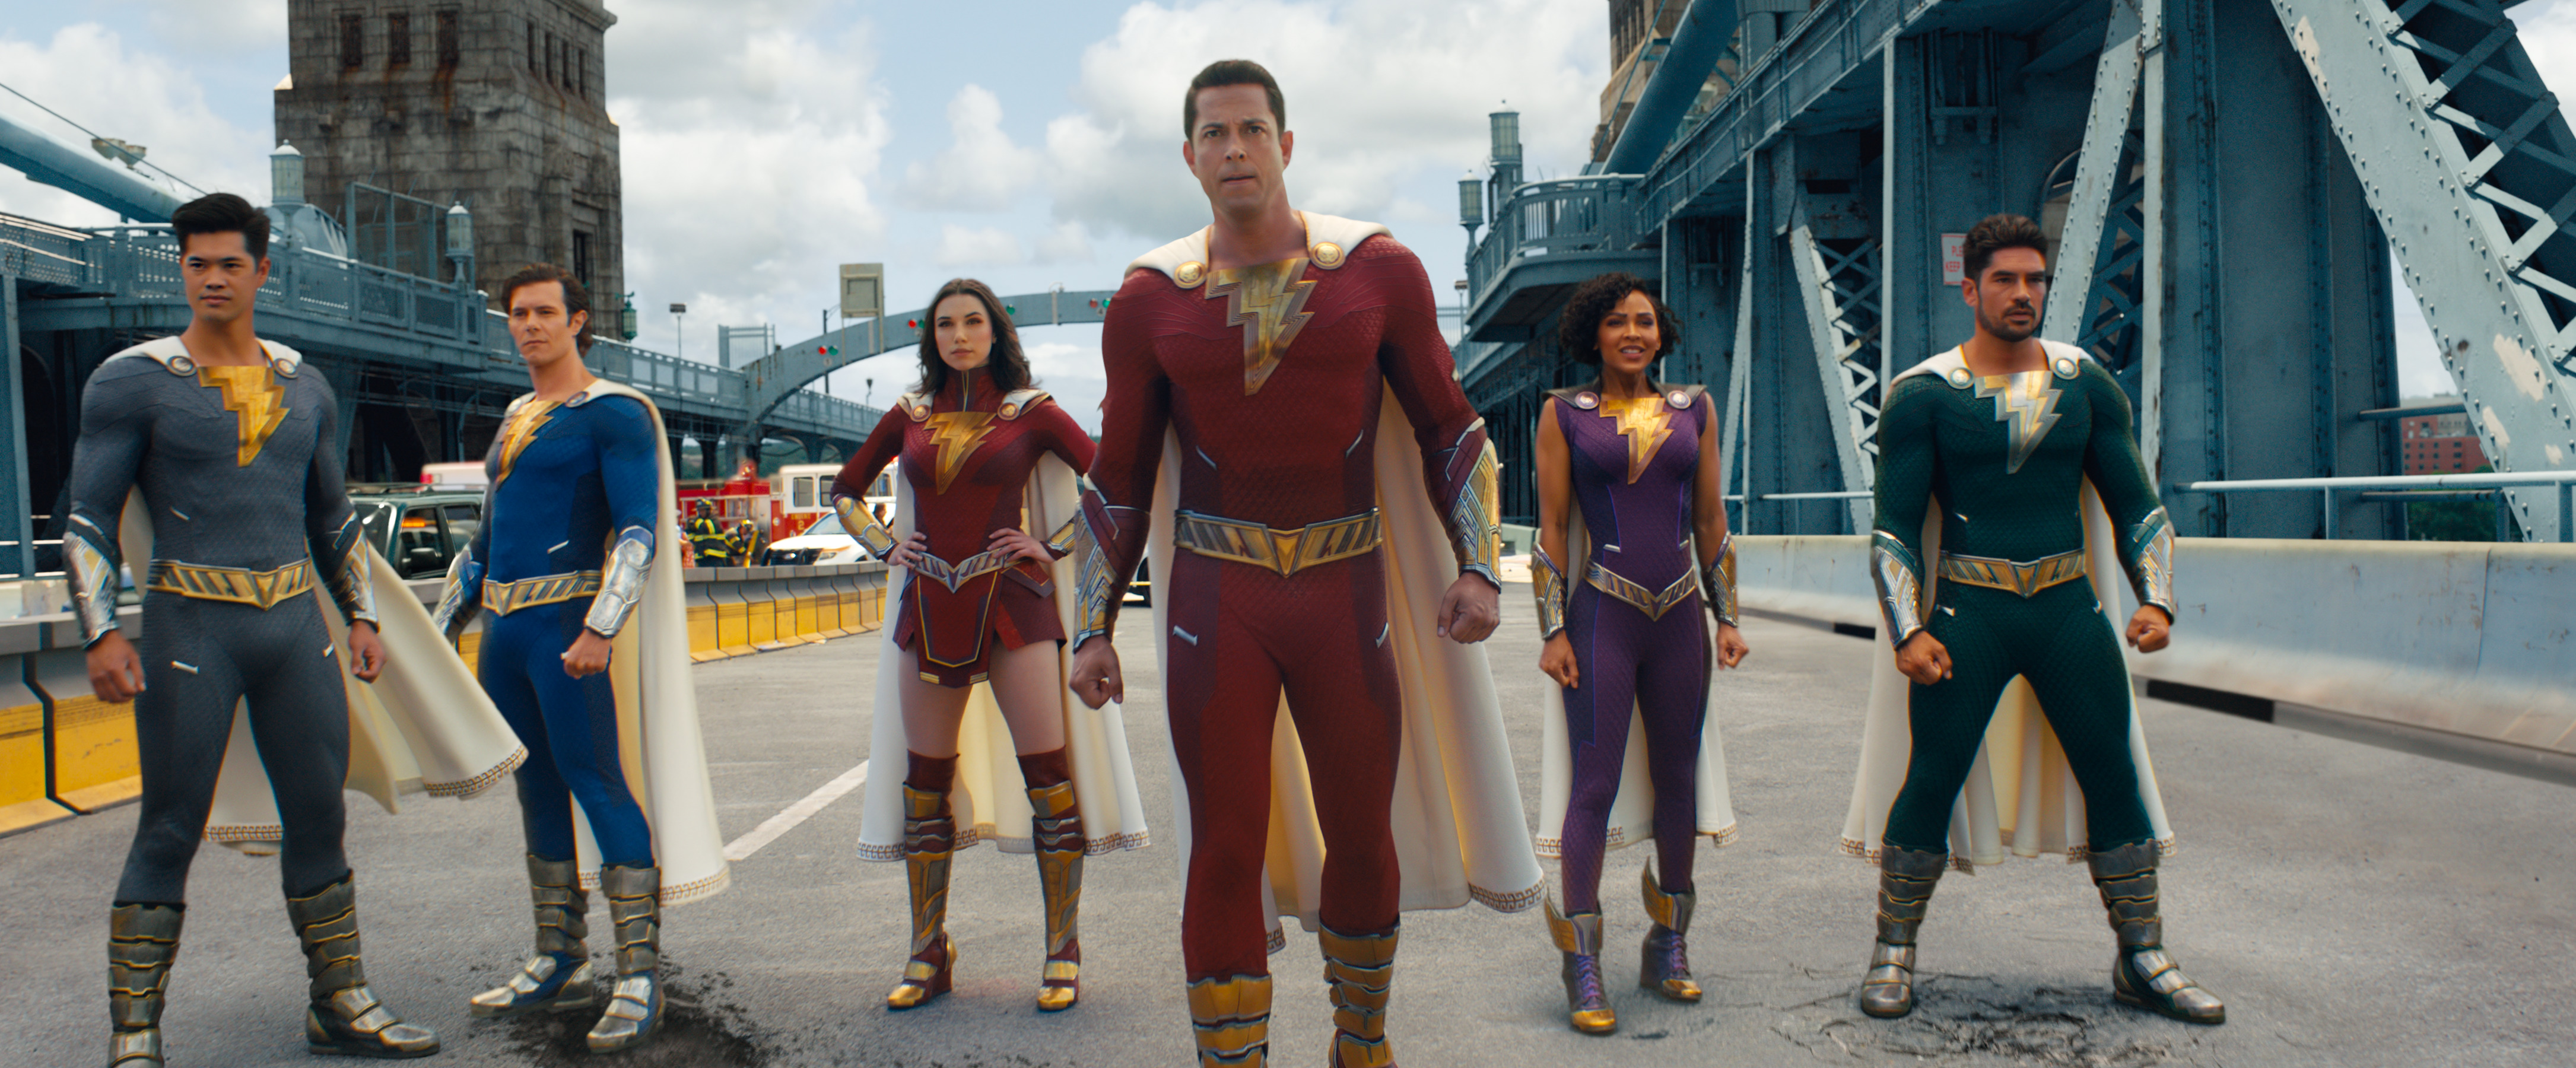 Adam Brody, Meagan Good, Zachary Levi, D.J. Cotrona, Grace Caroline Currey, and Ross Butler in 'Shazam! Fury of the Gods'. Image: Warner Bros. Pictures